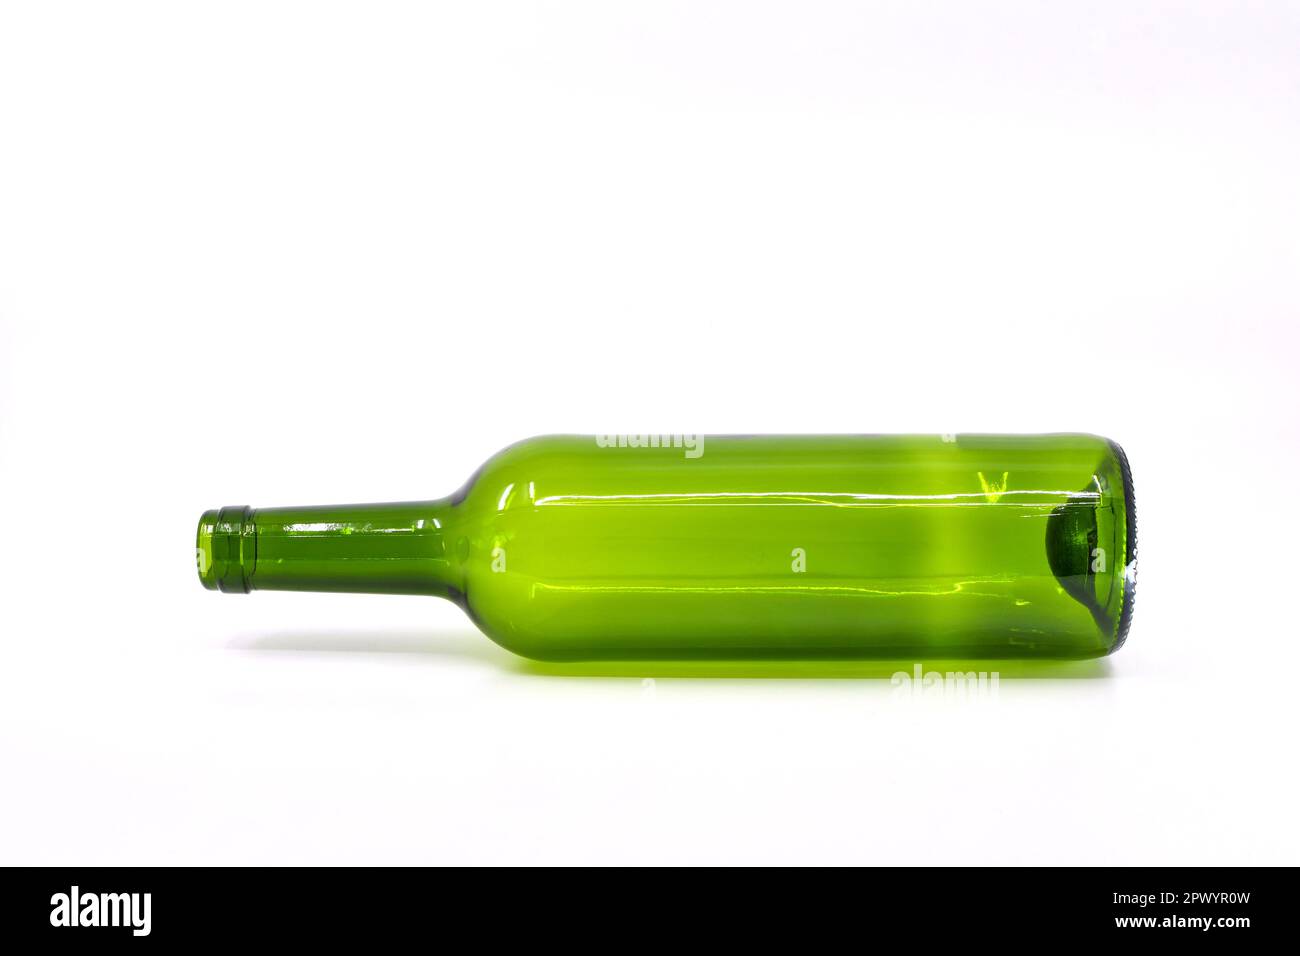 Empty green wine bottle lying on its side against a plain white background Stock Photo